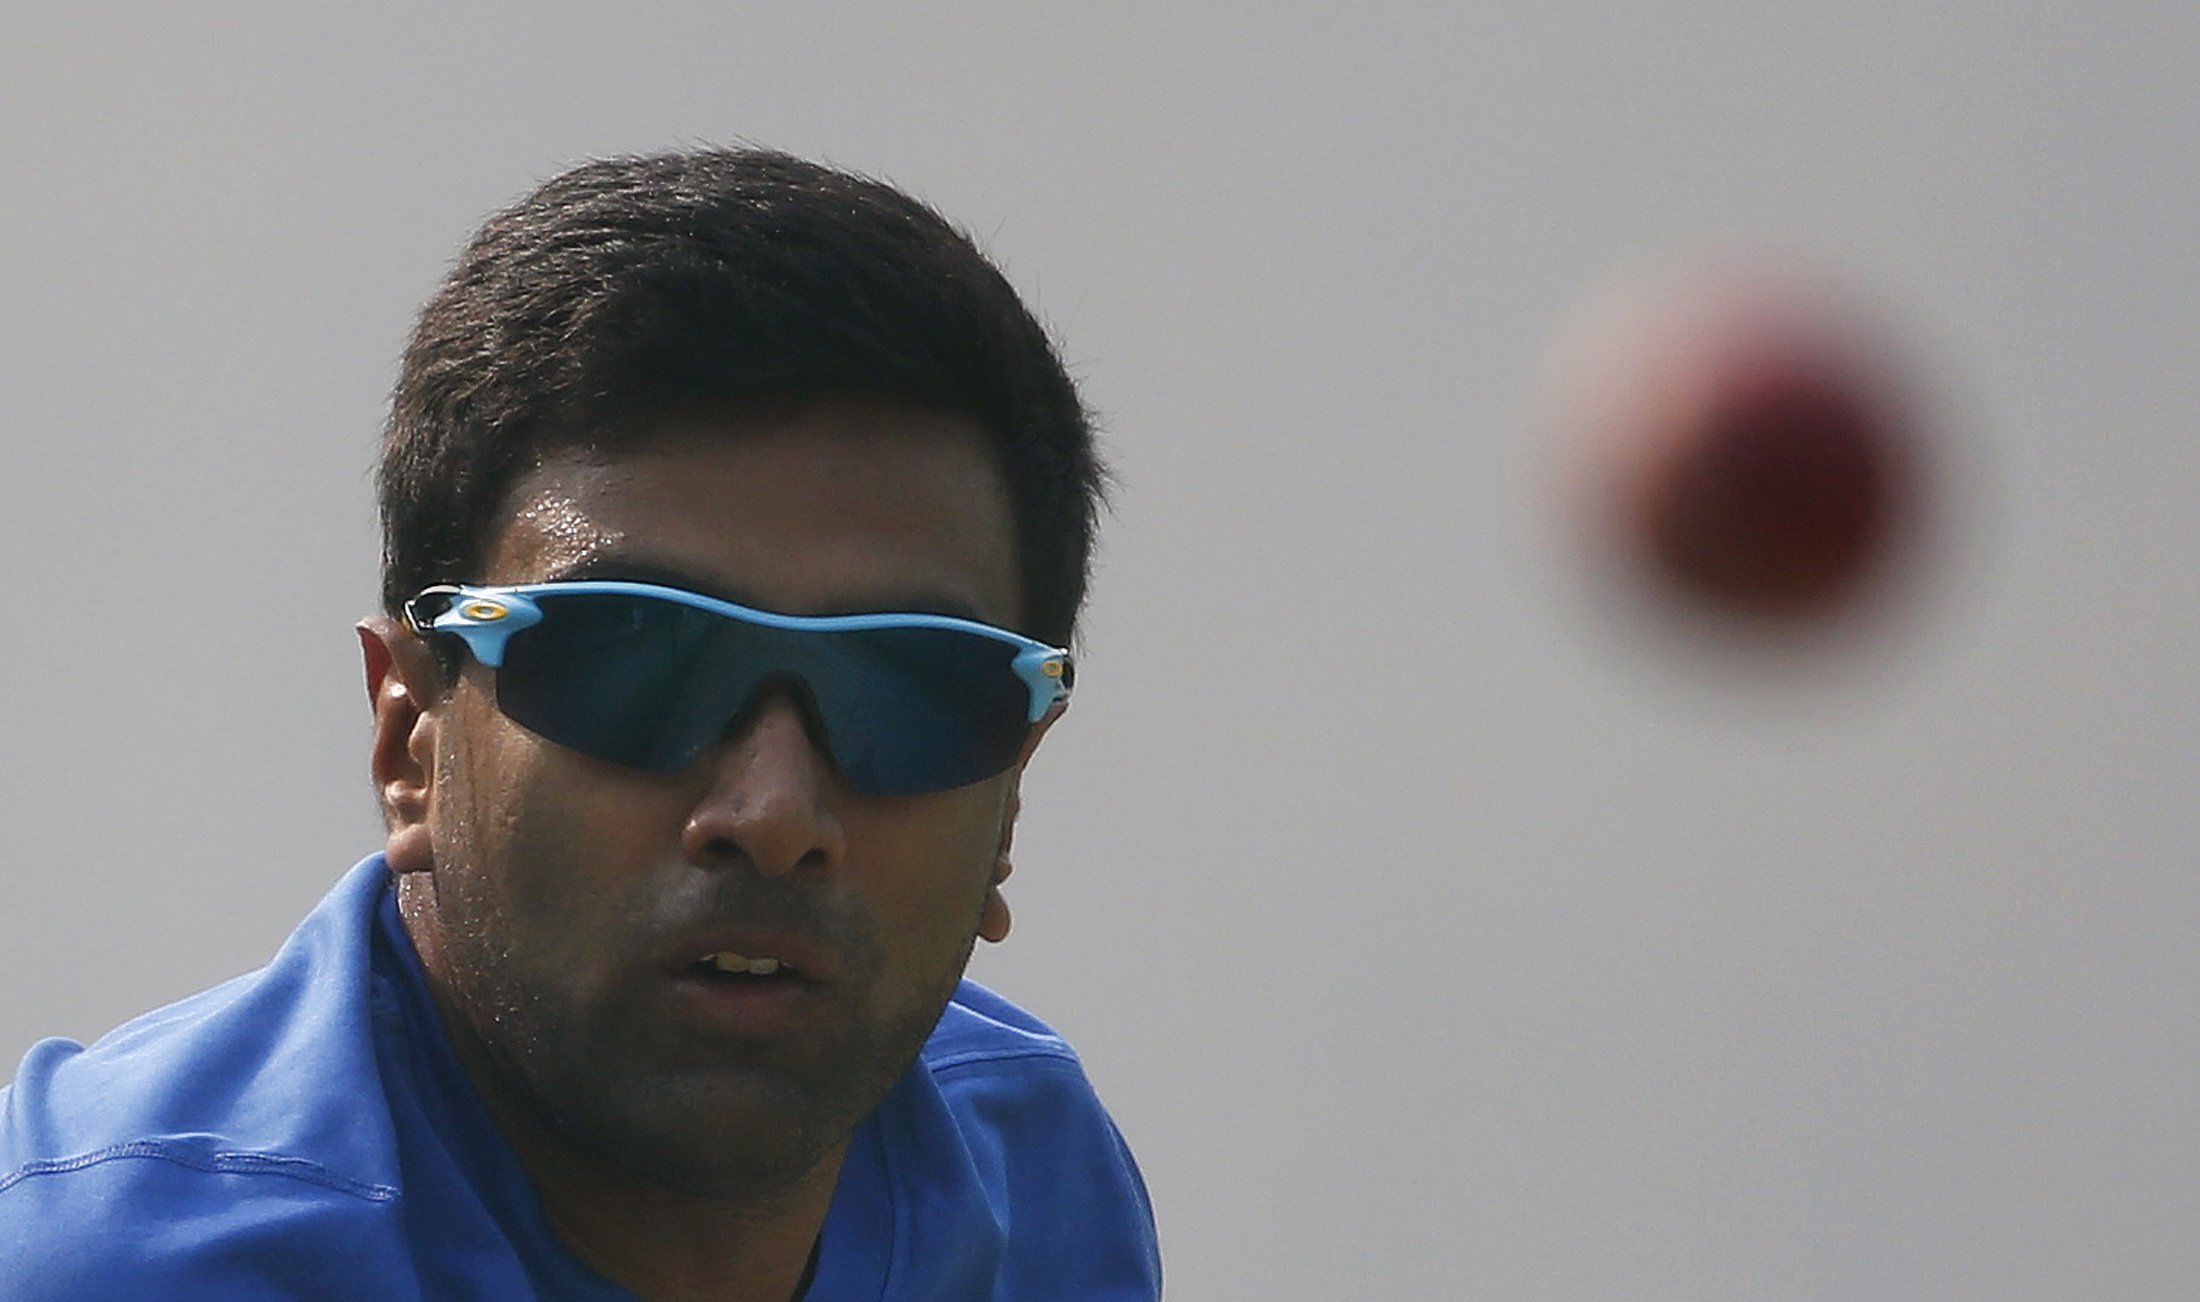 India's Ravichandran Ashwin bowls in the nets during a practice session ahead of their first test cricket match against South Africa, in Mohali, India, November 4, 2015. REUTERS/Adnan Abidi